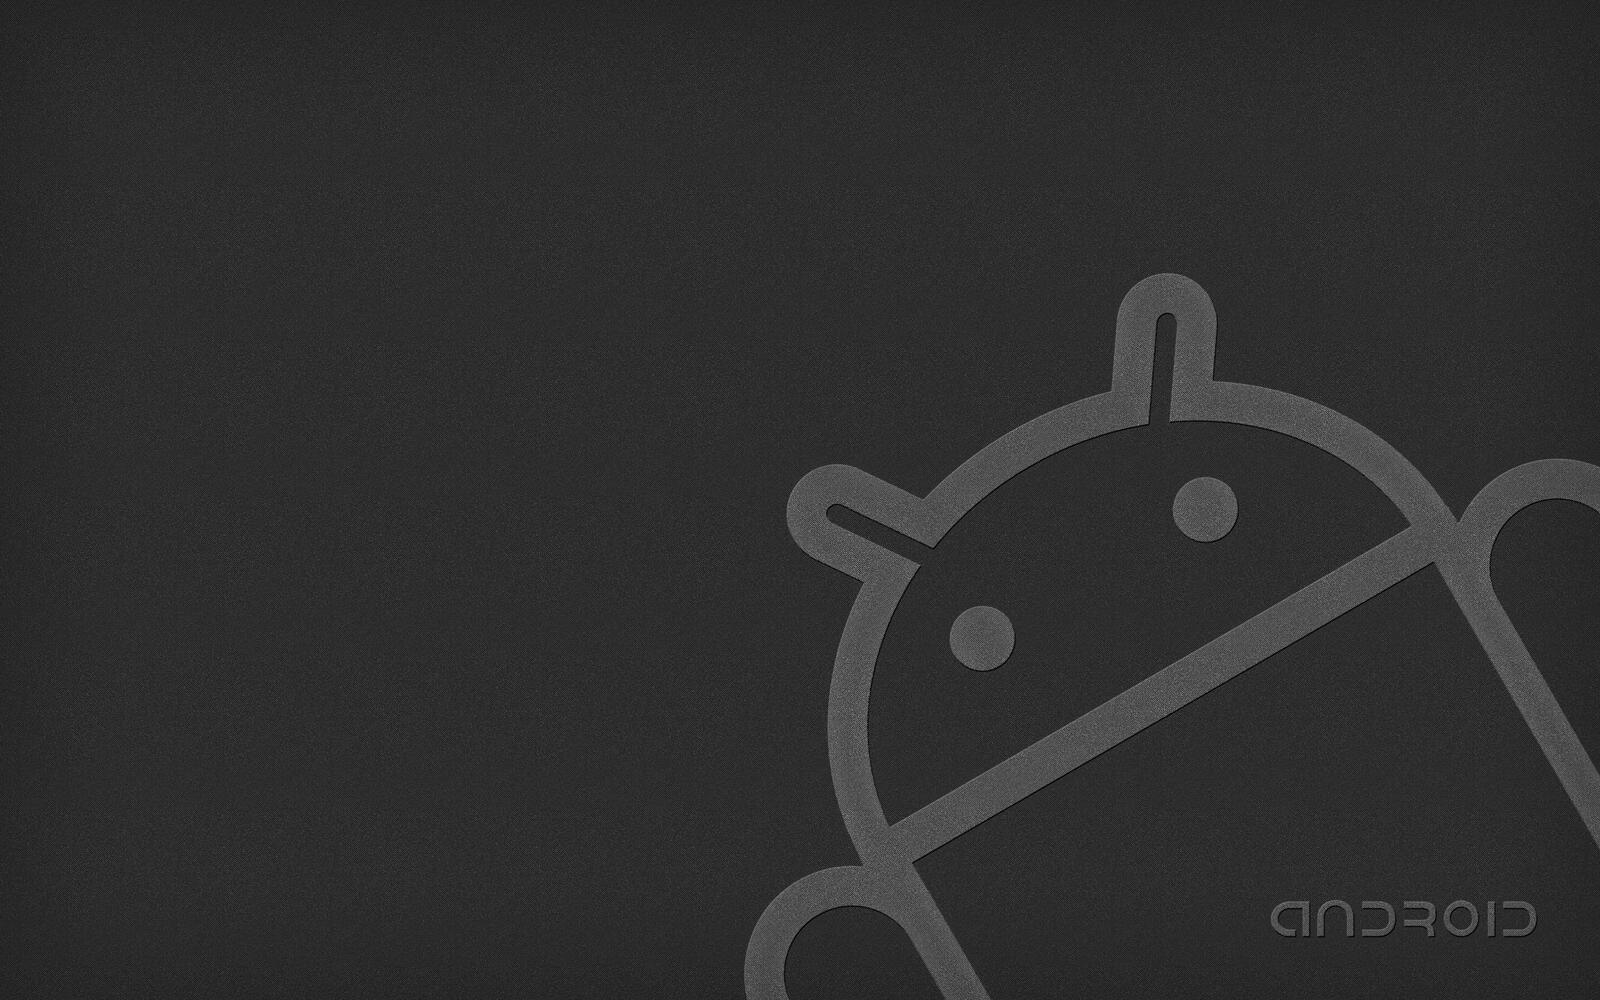 Wallpapers android logo drawing on the desktop